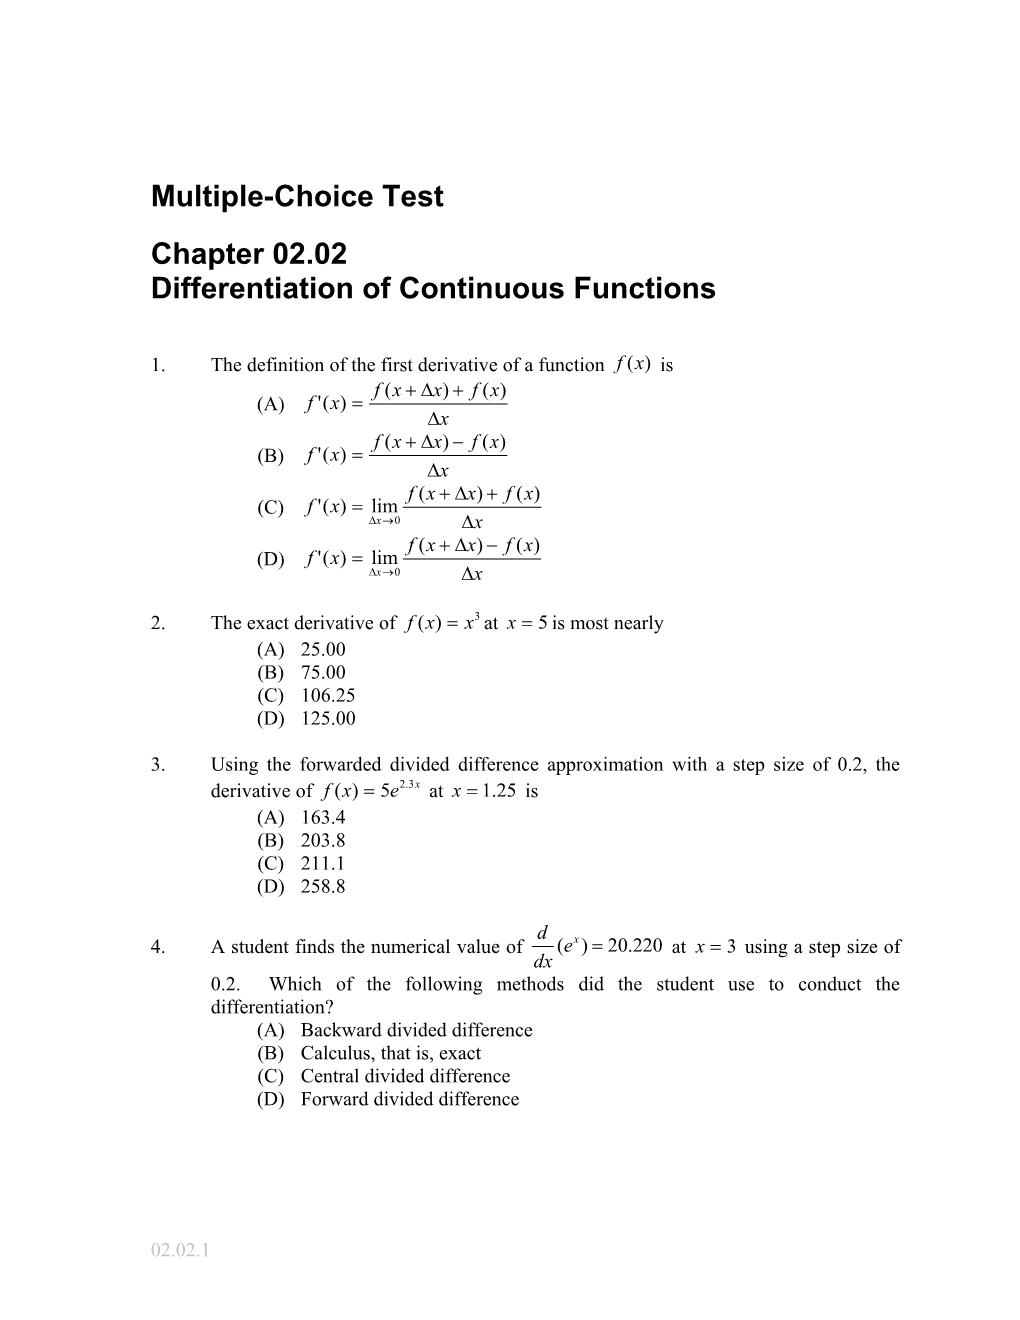 Differentiation of Continuous Functions Multiple Choice Quiz